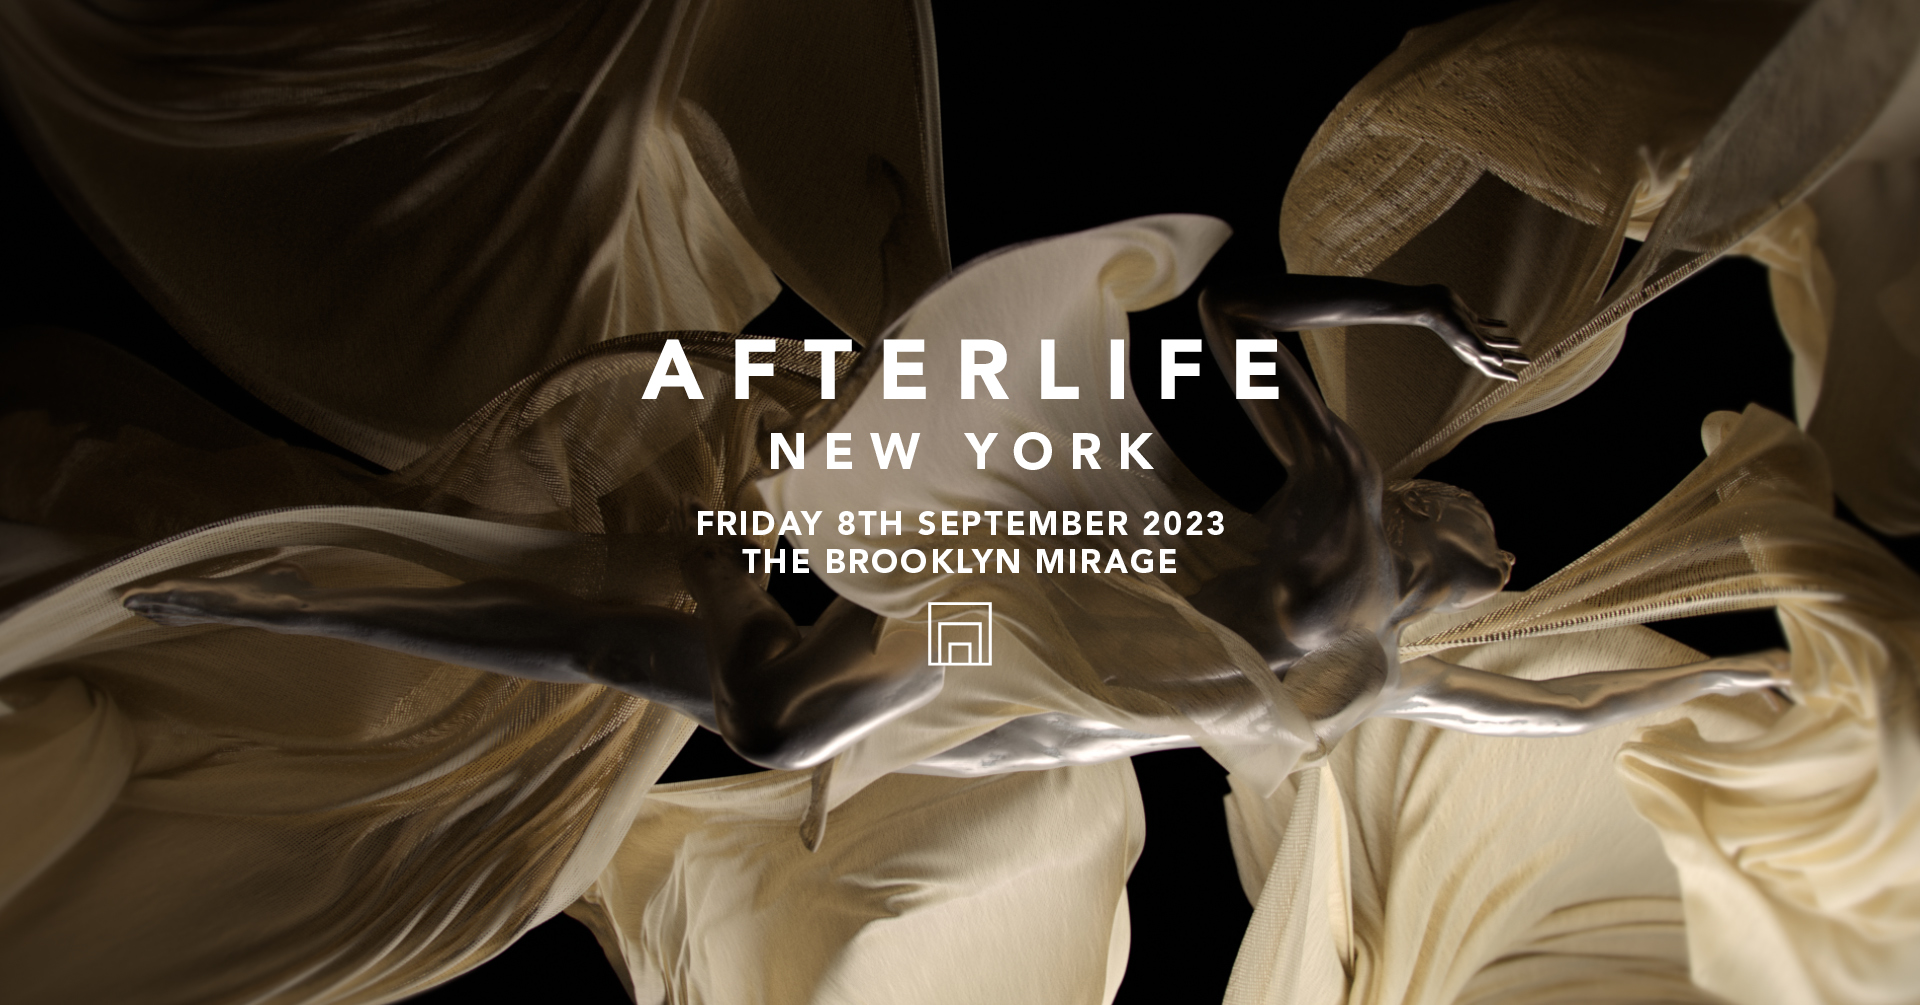 🚨 BREAKING - AFTERLIFE is finally coming to Los Angeles this Fall. On  October 14th, 2023, prepare to transcend reality as Afterlife will…